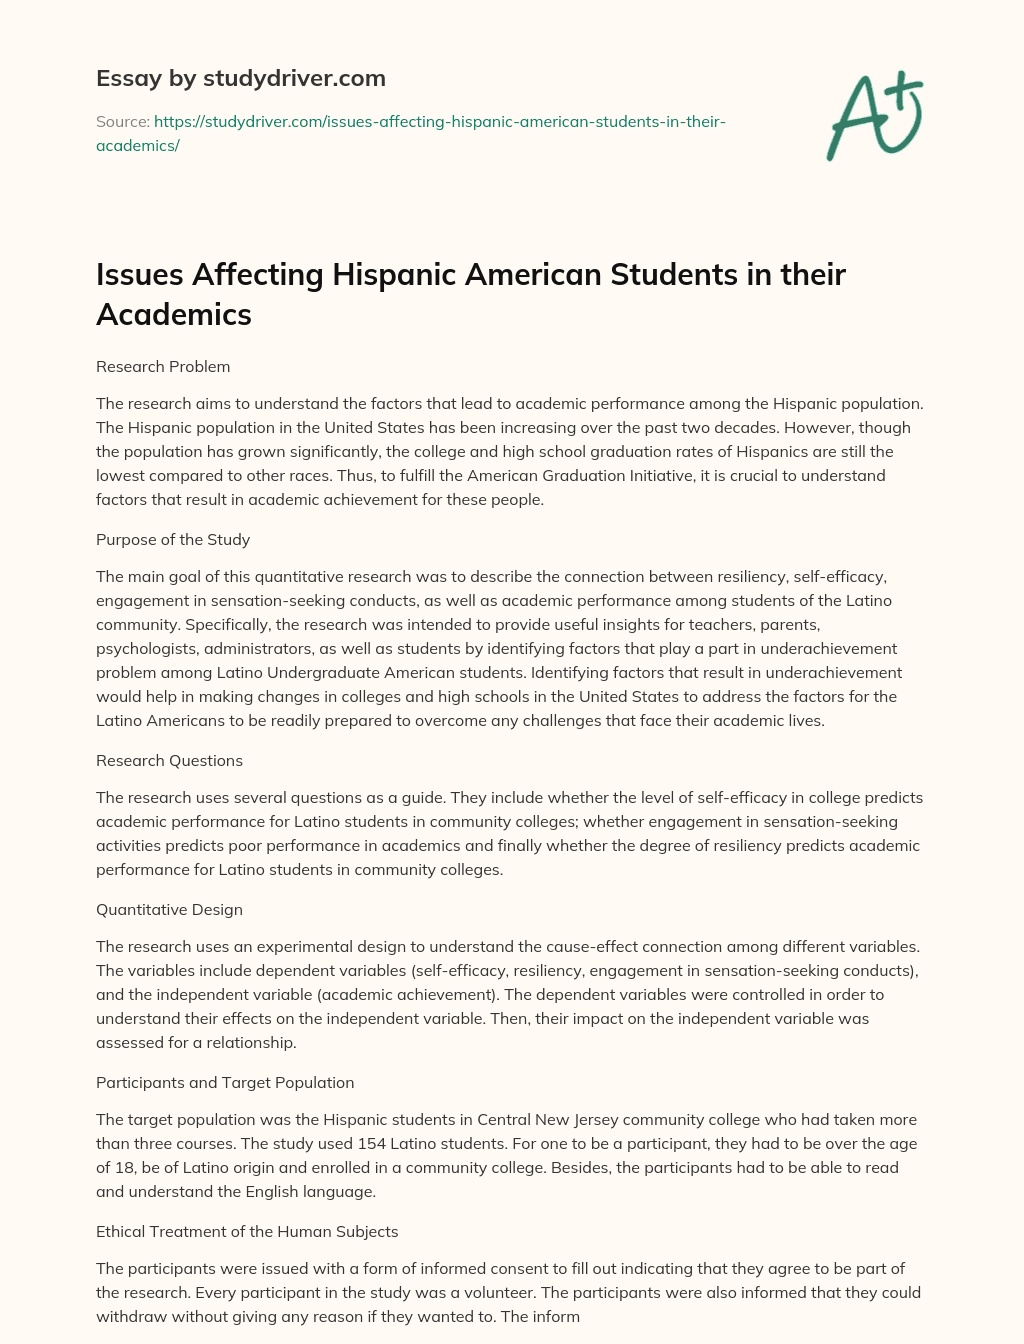 Issues Affecting Hispanic American Students in their Academics essay